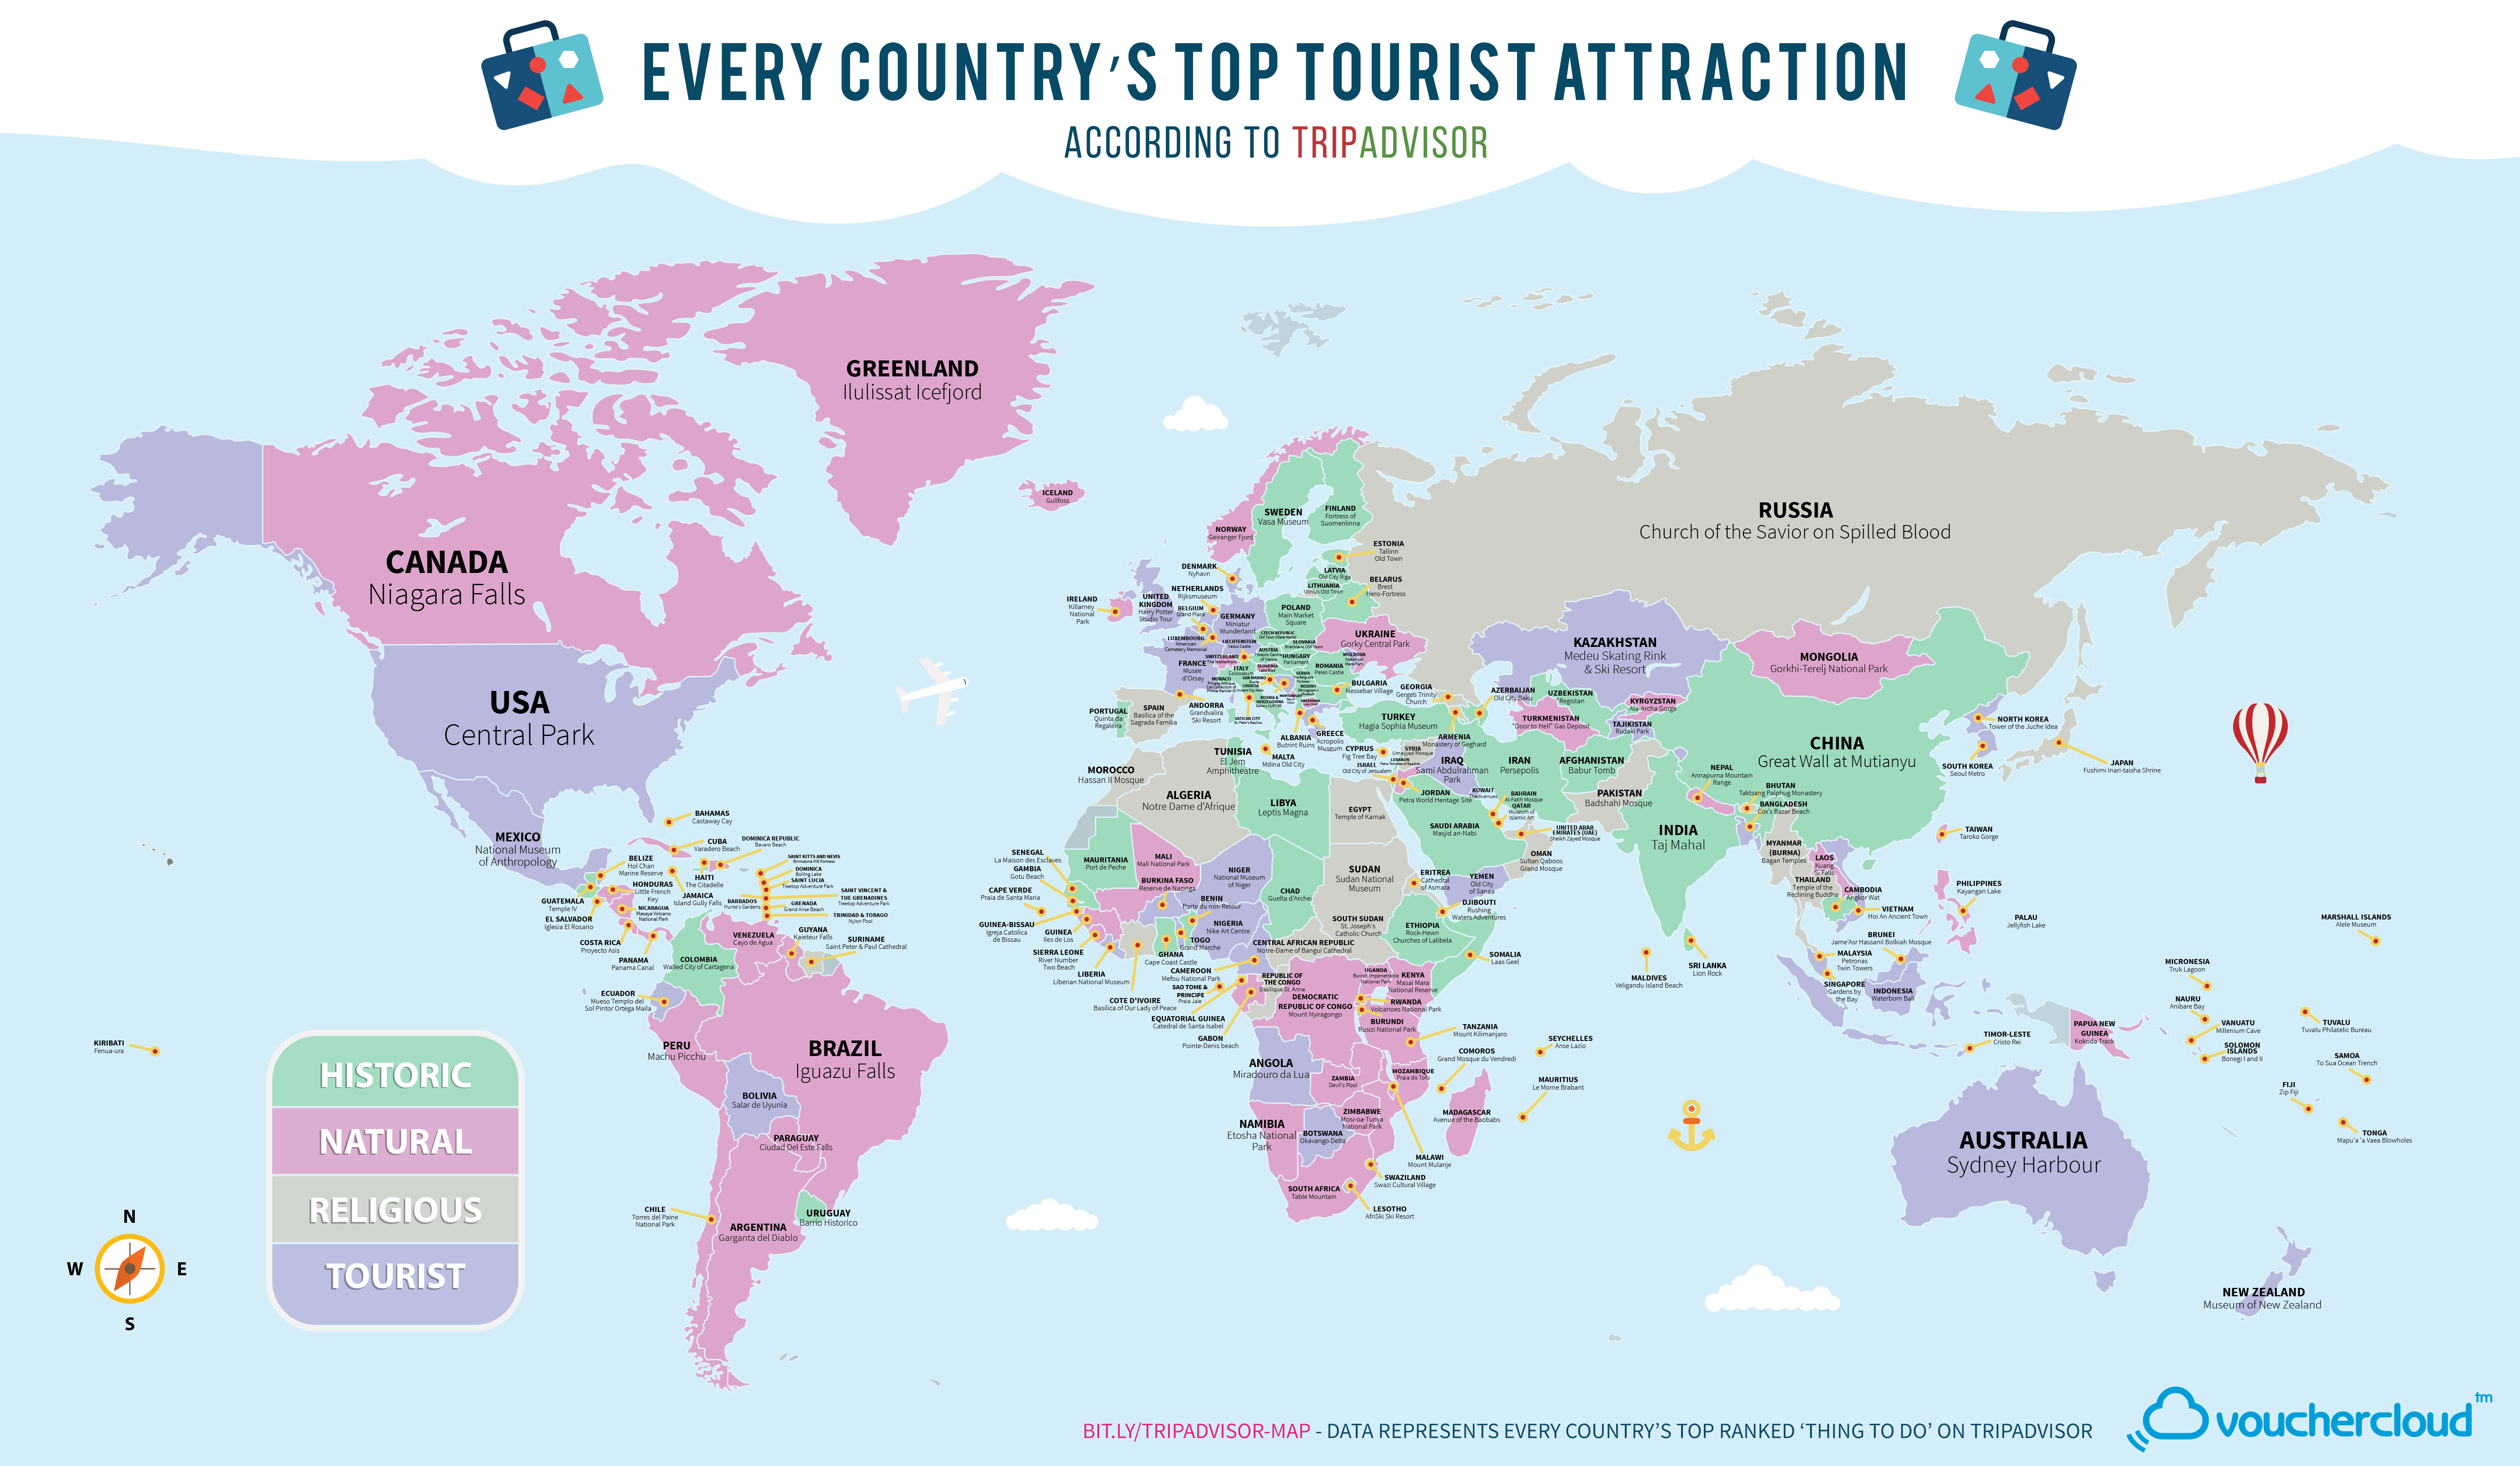 World's Top tourist Attractions